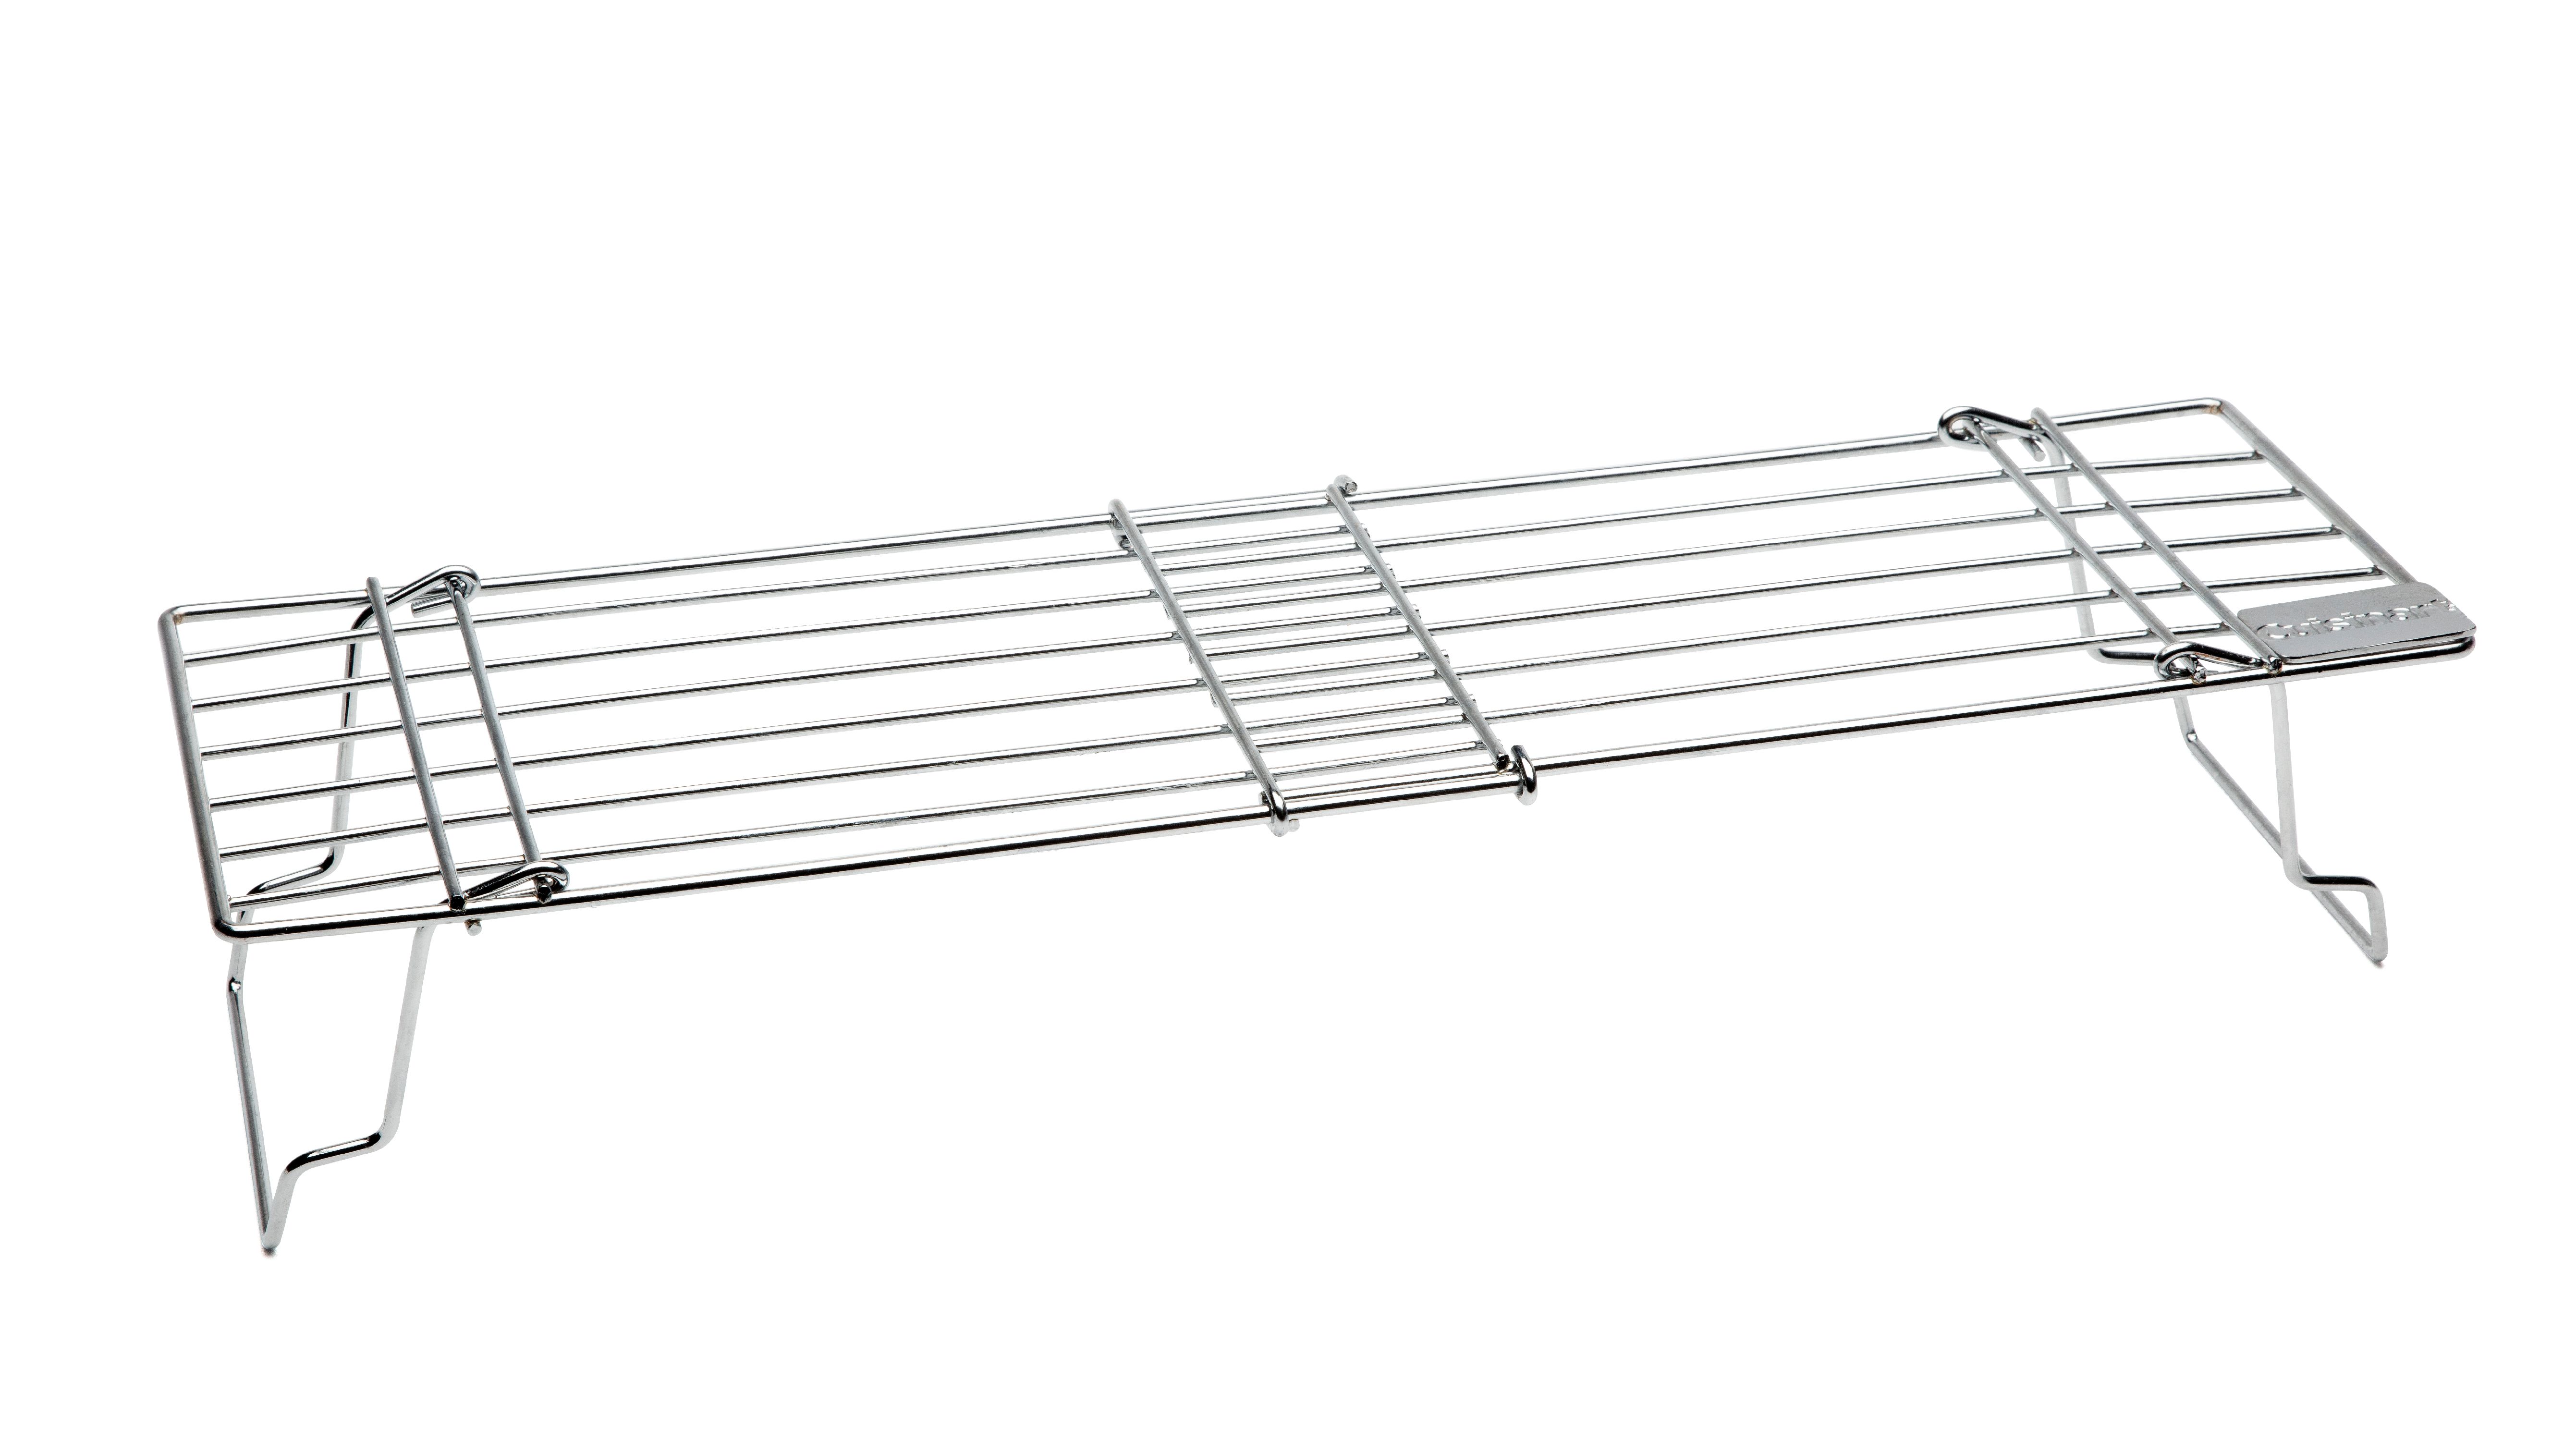 Cuisinart Universal Grill Warming Rack - Extends from 15.5" to 21.75" - image 4 of 5